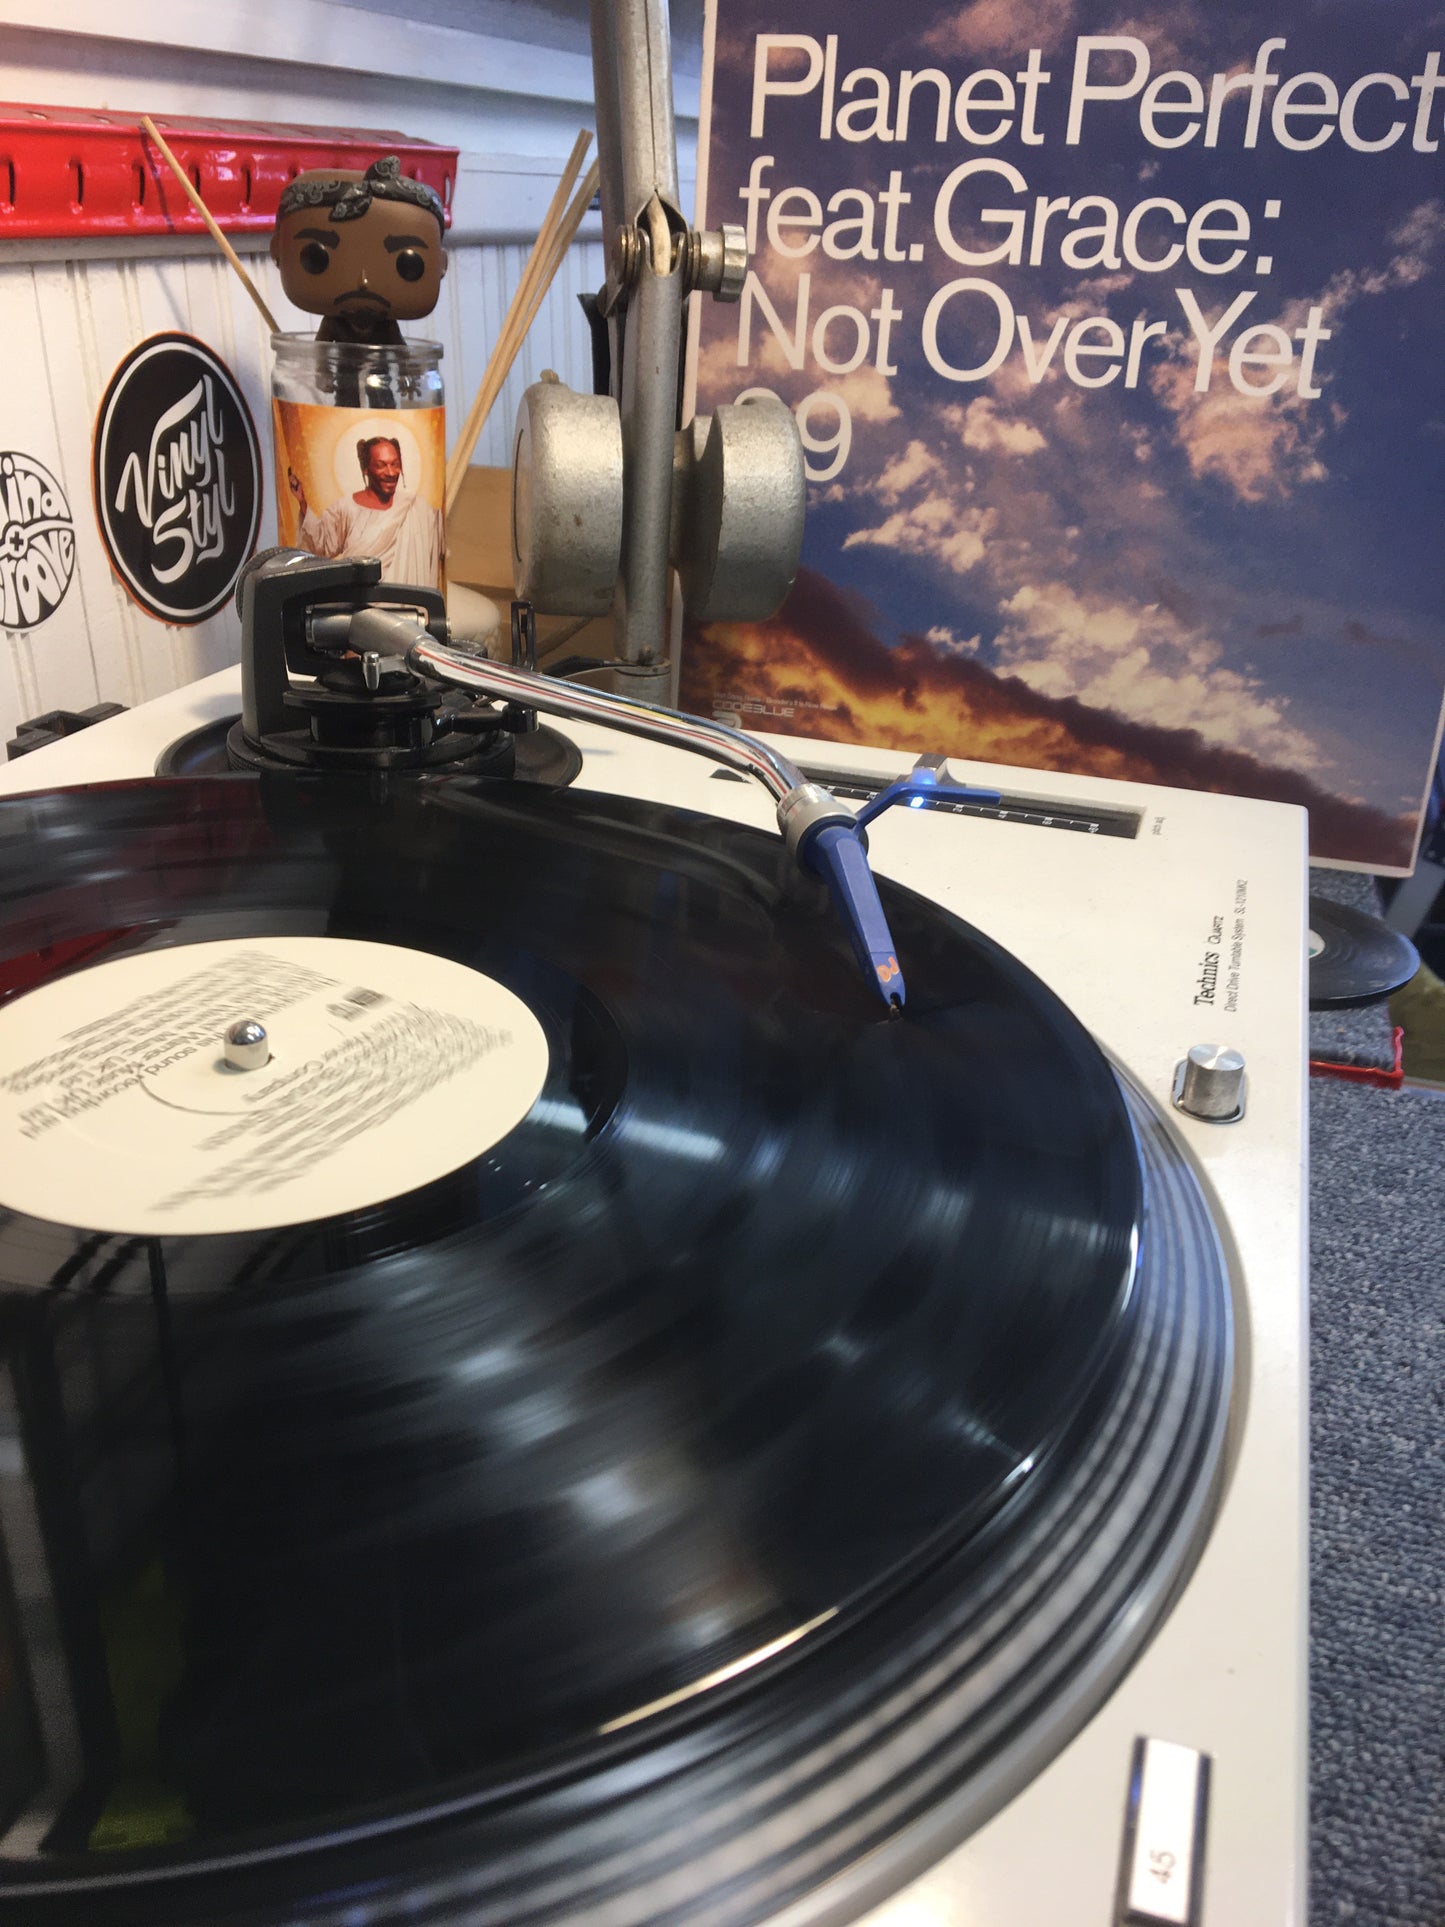 PLANET PERFECTO feat. Grace 12” ; NOT OVER YET 99